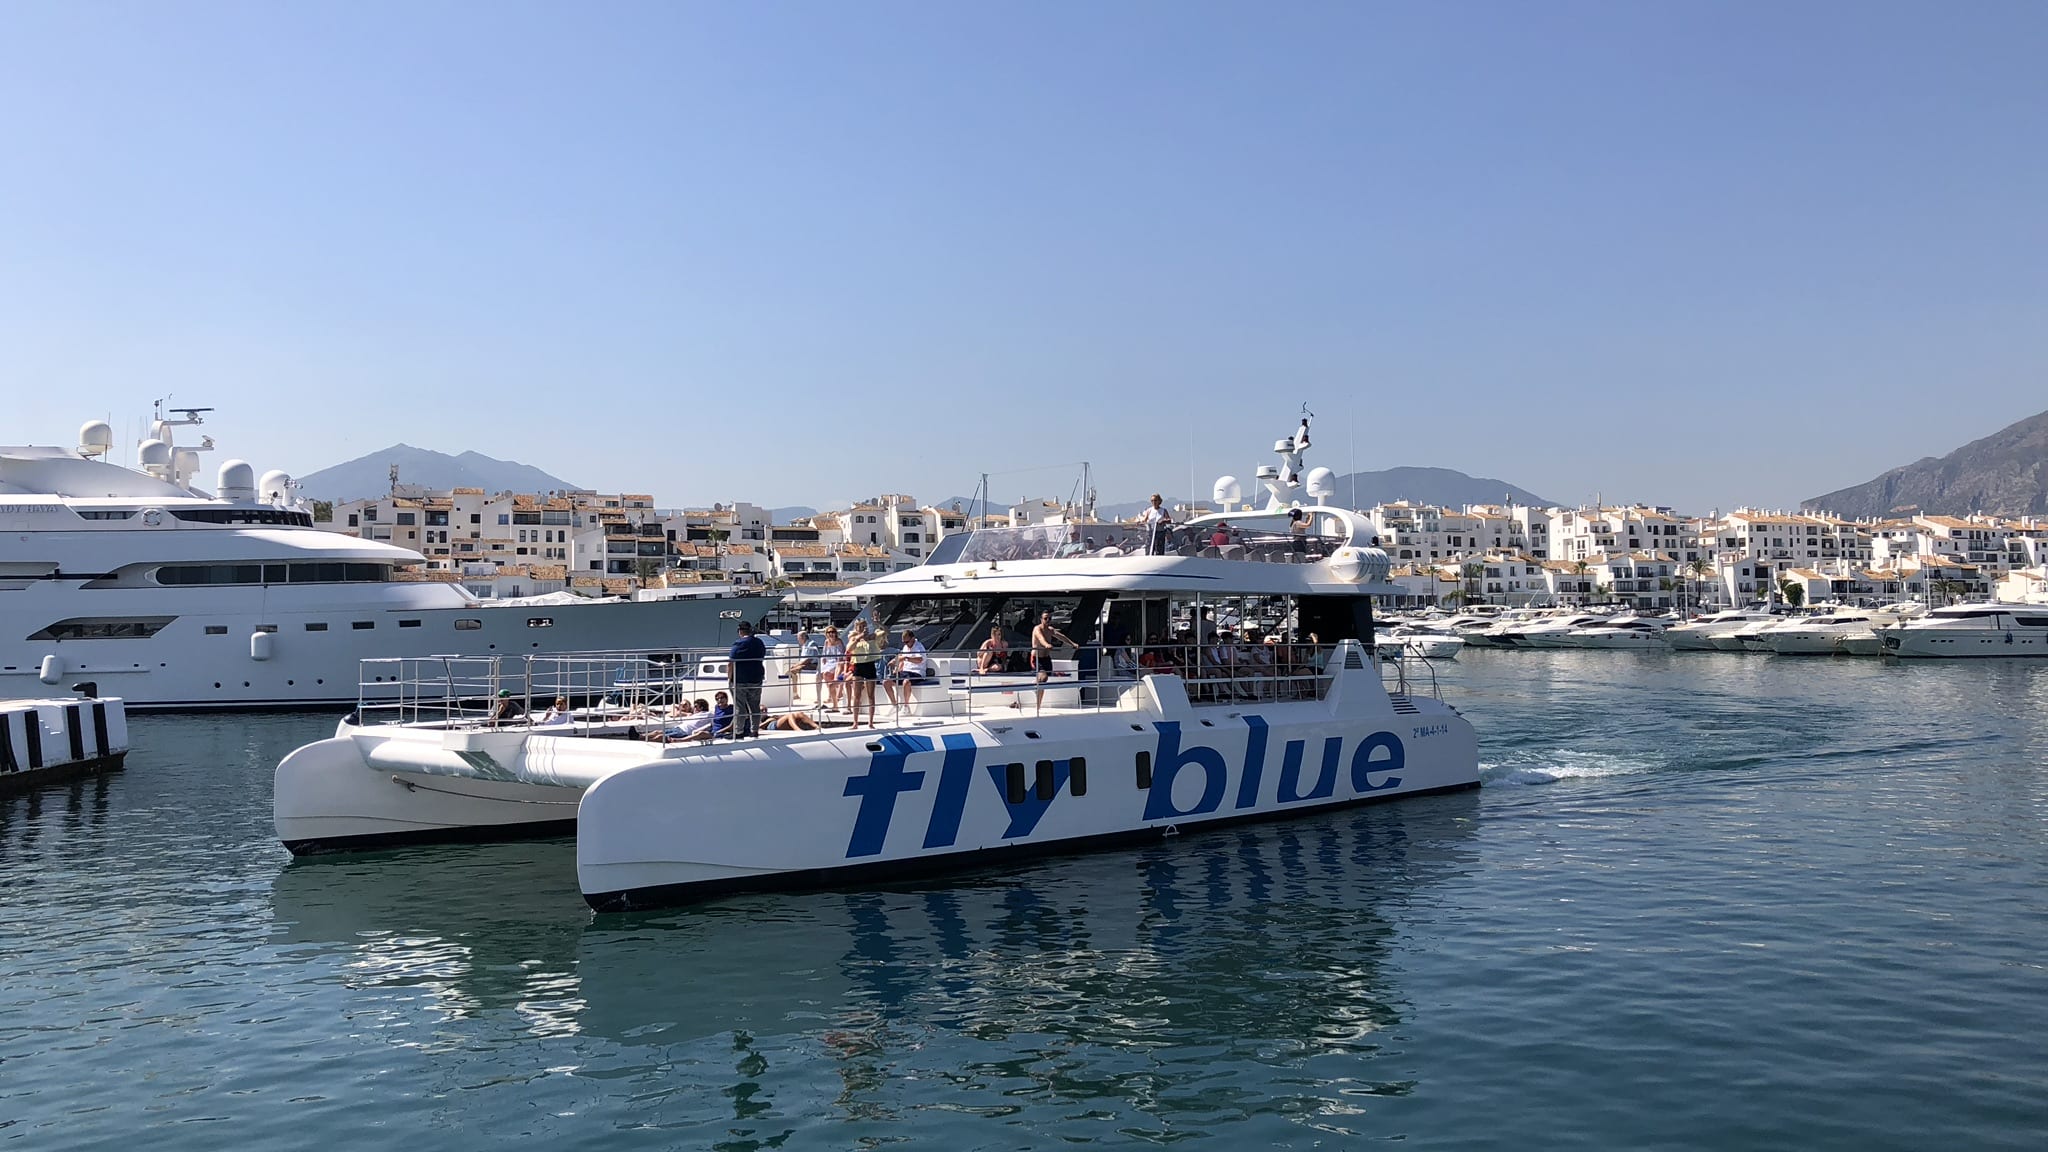 10 Best Things to Do in Puerto Banus - Questates